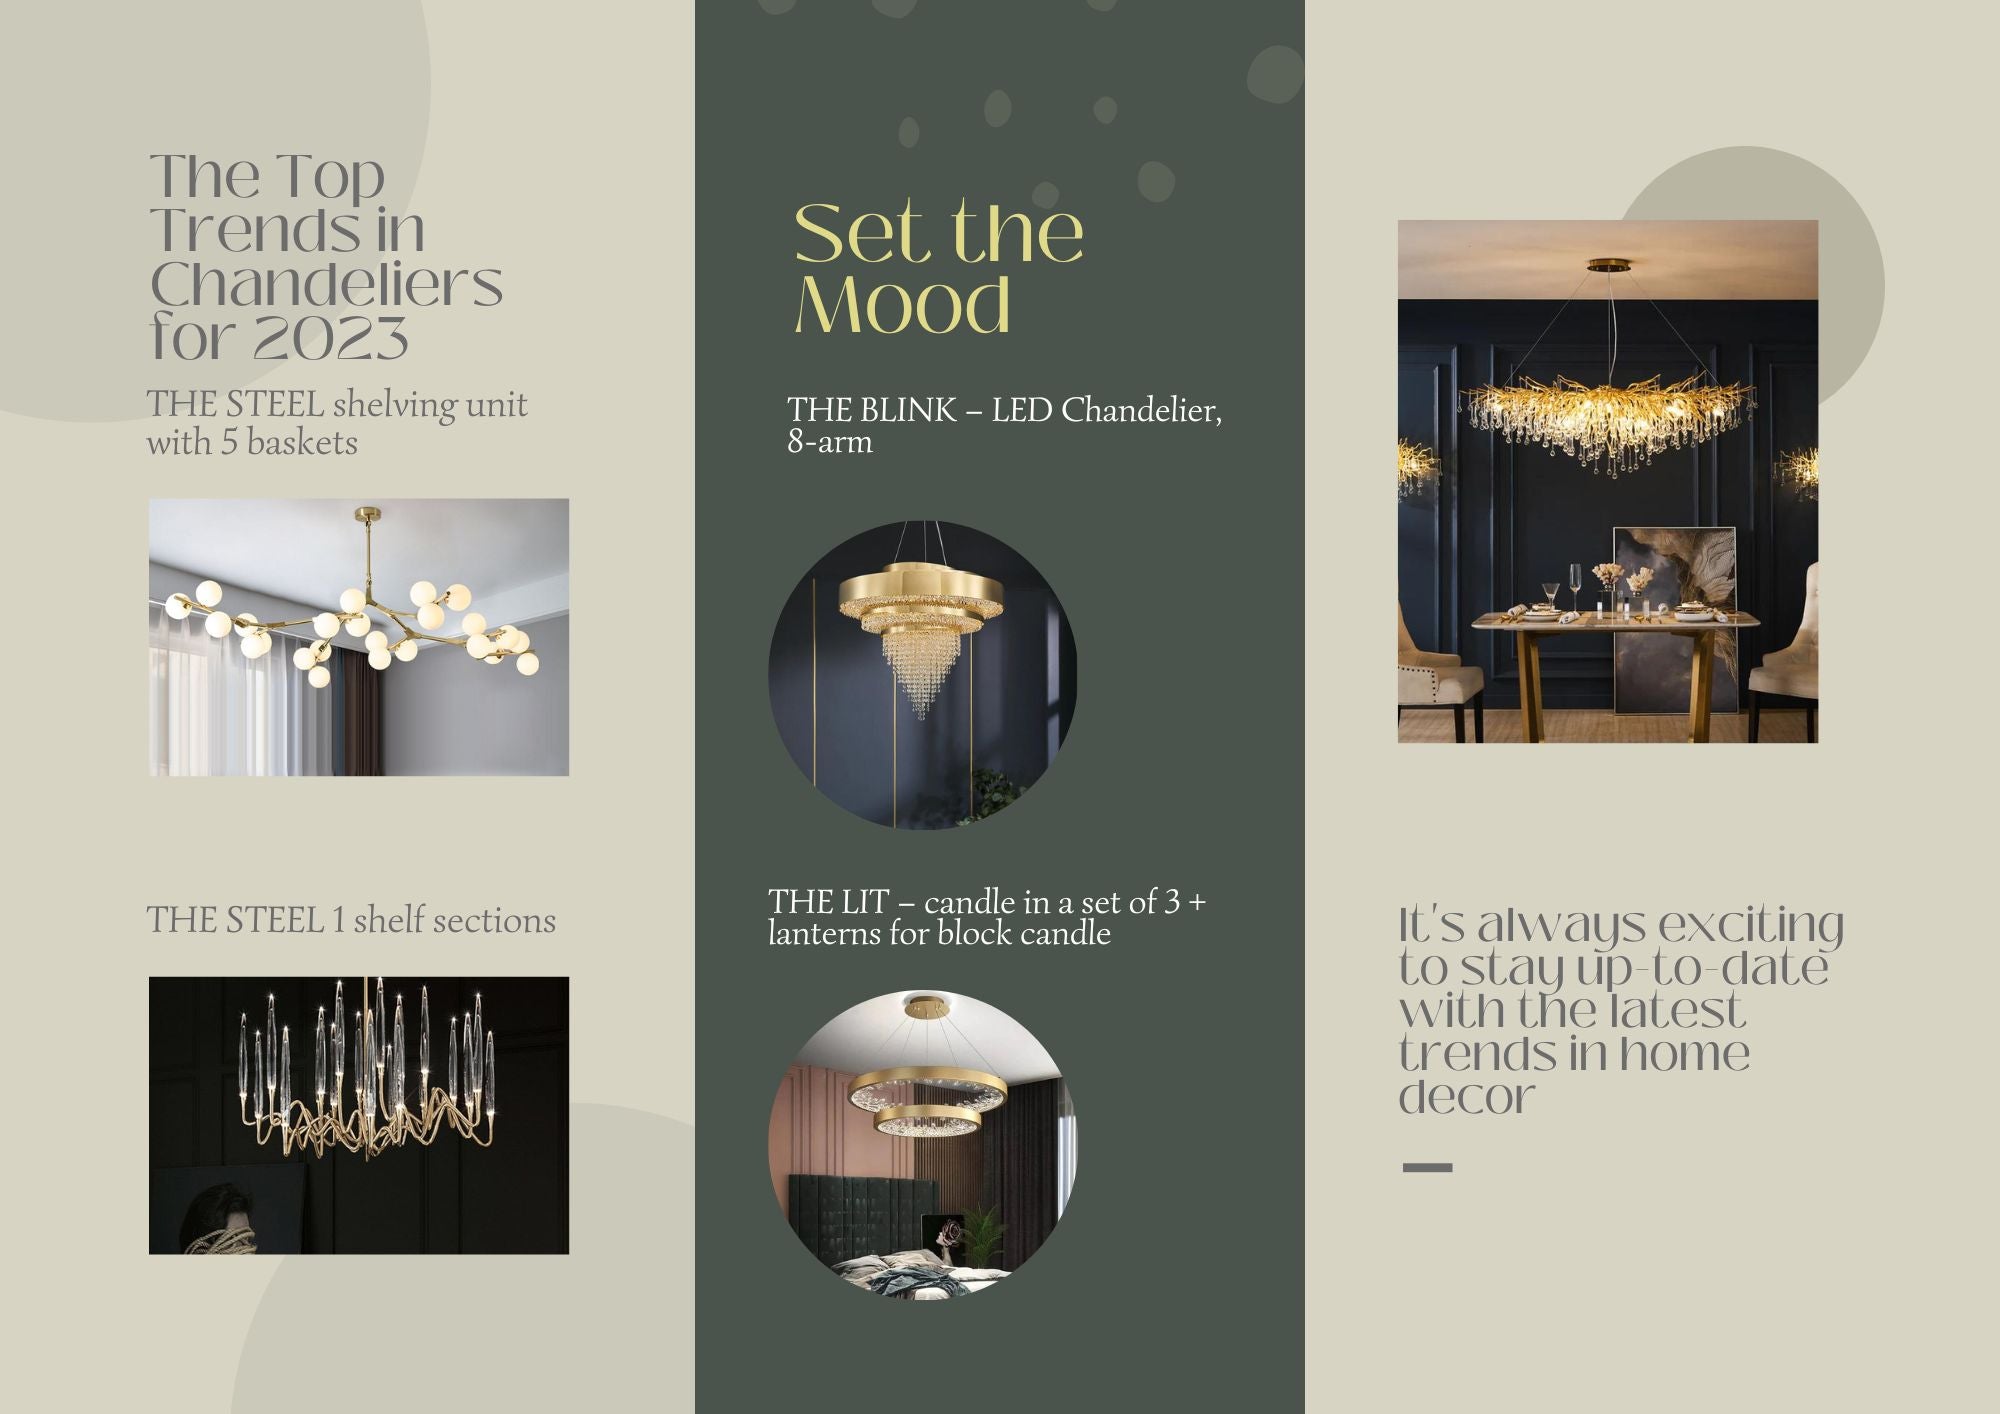 The Top Trends in Chandeliers for 2023